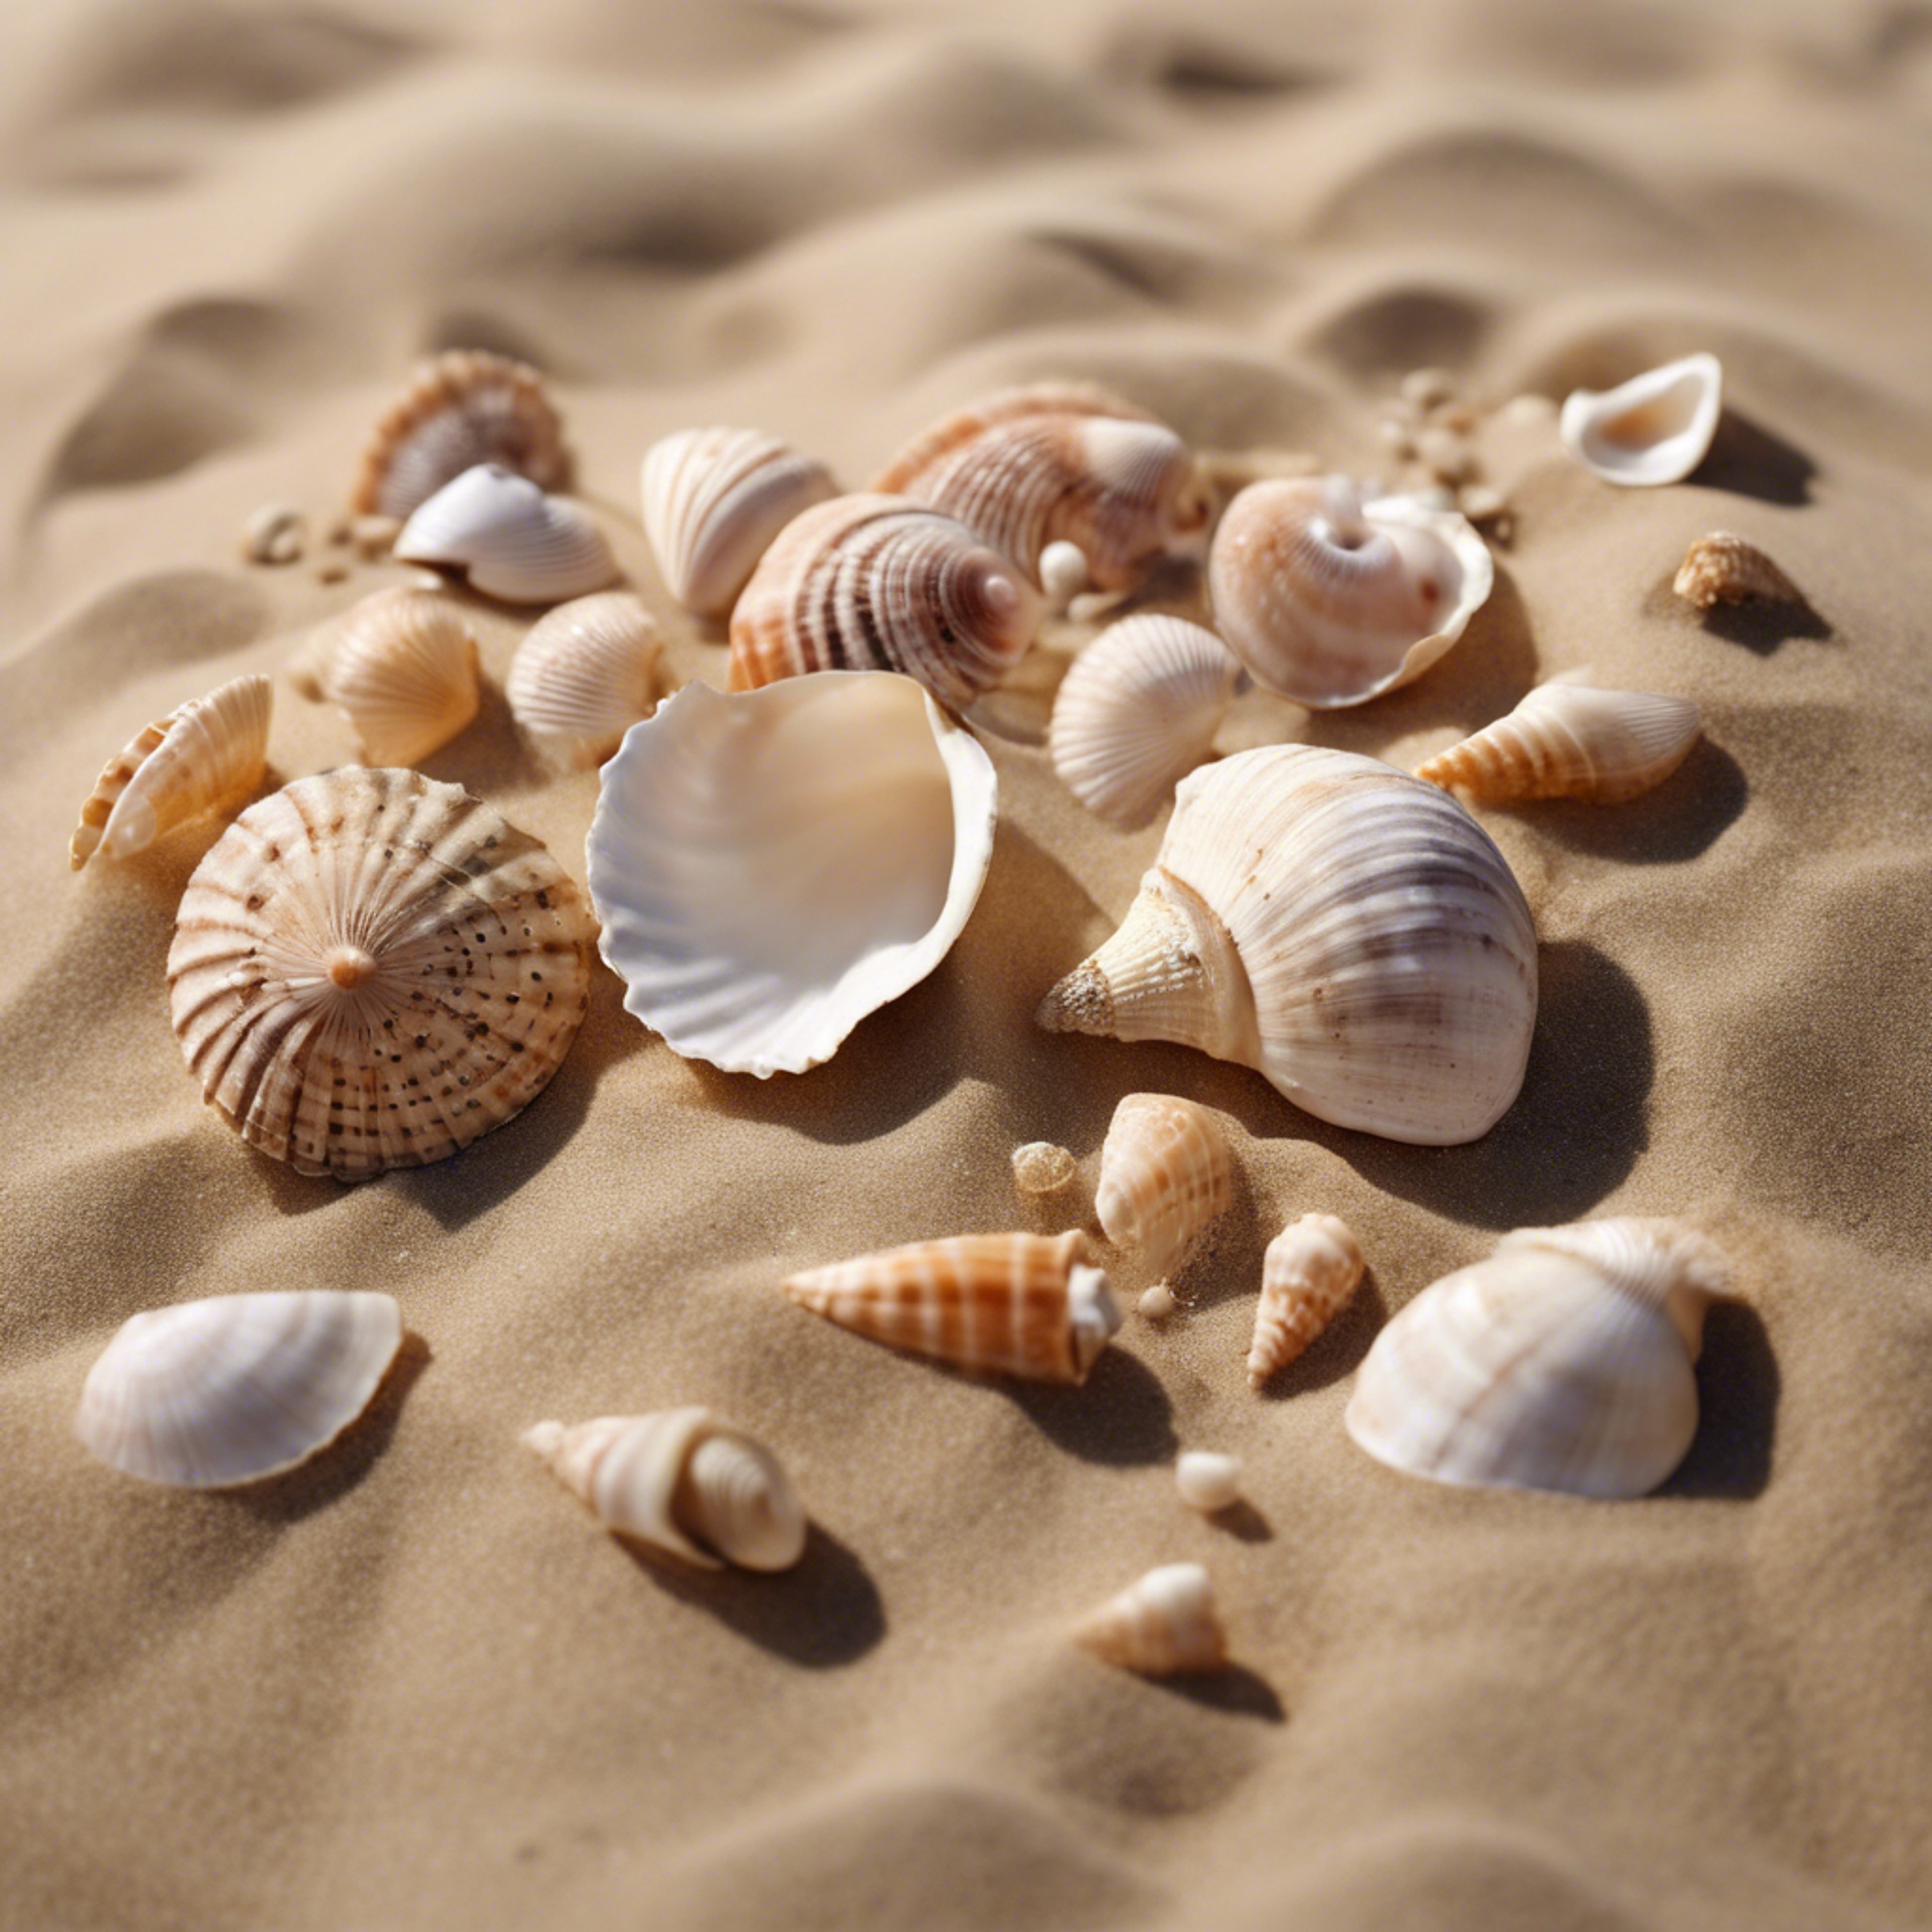 An arrangement of seashells of various sizes in a cool beige sand. 墙纸[d4509fc1f43d45f6bba6]